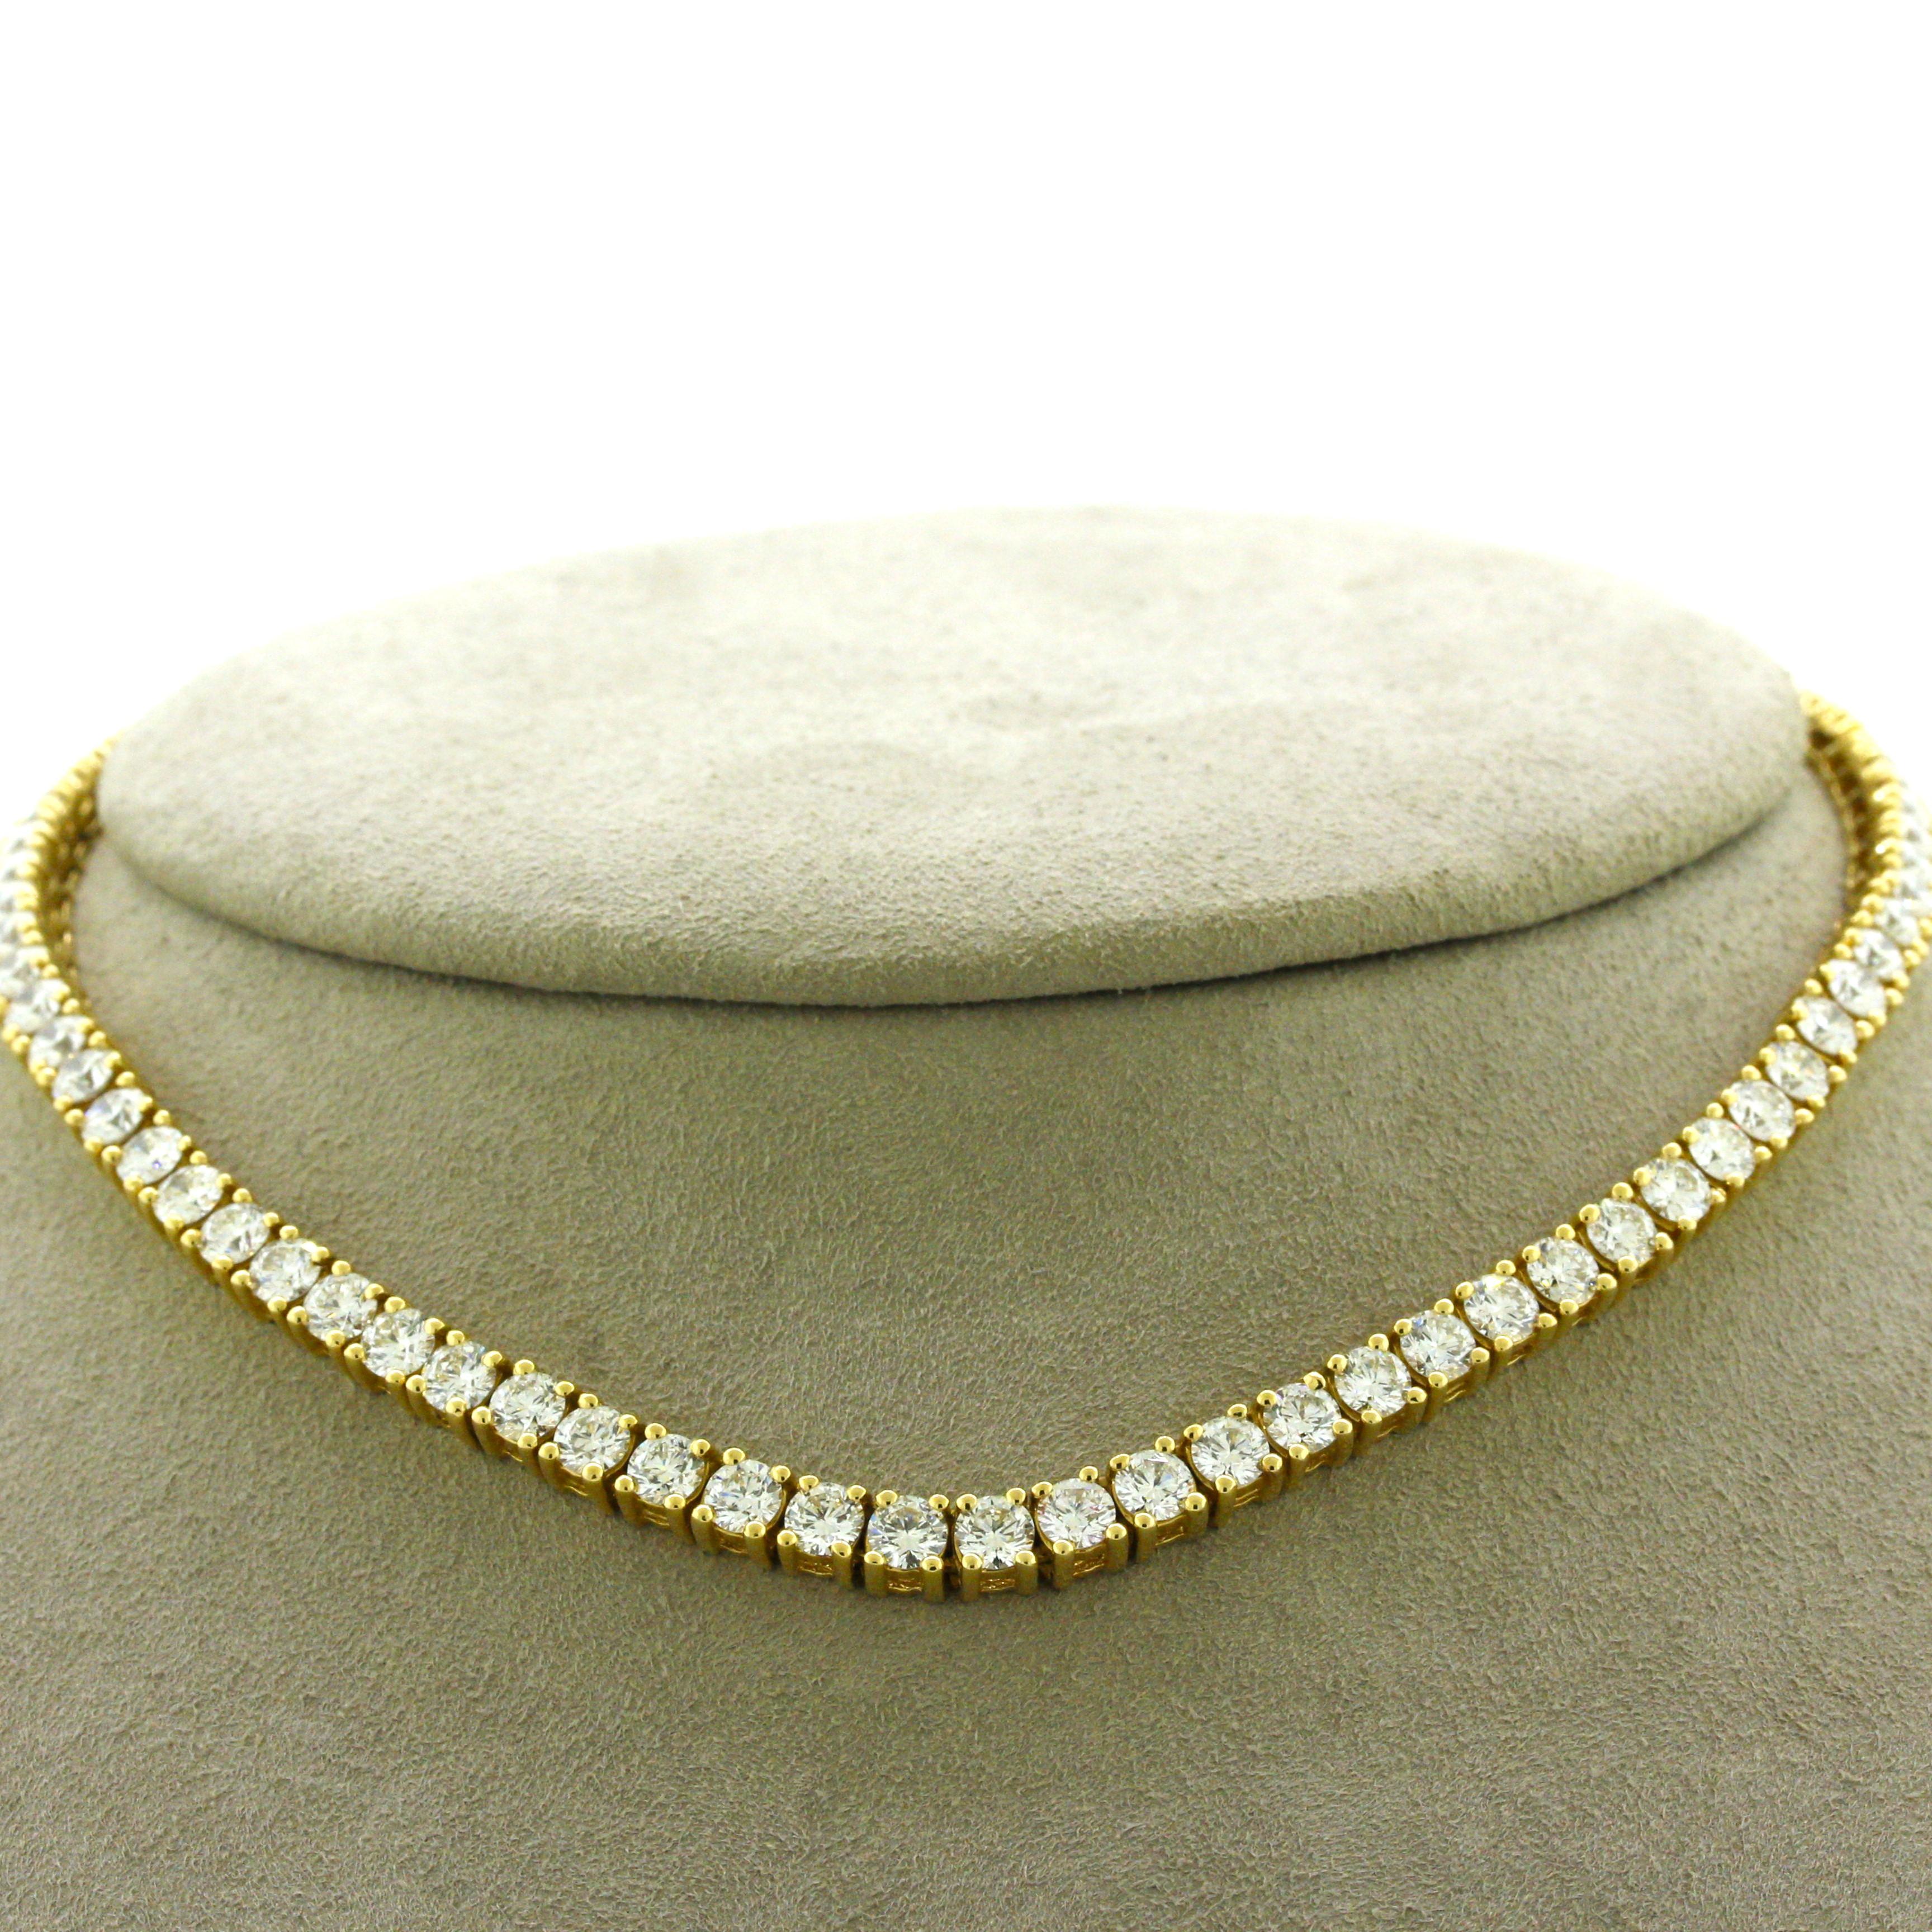 13 inch necklace